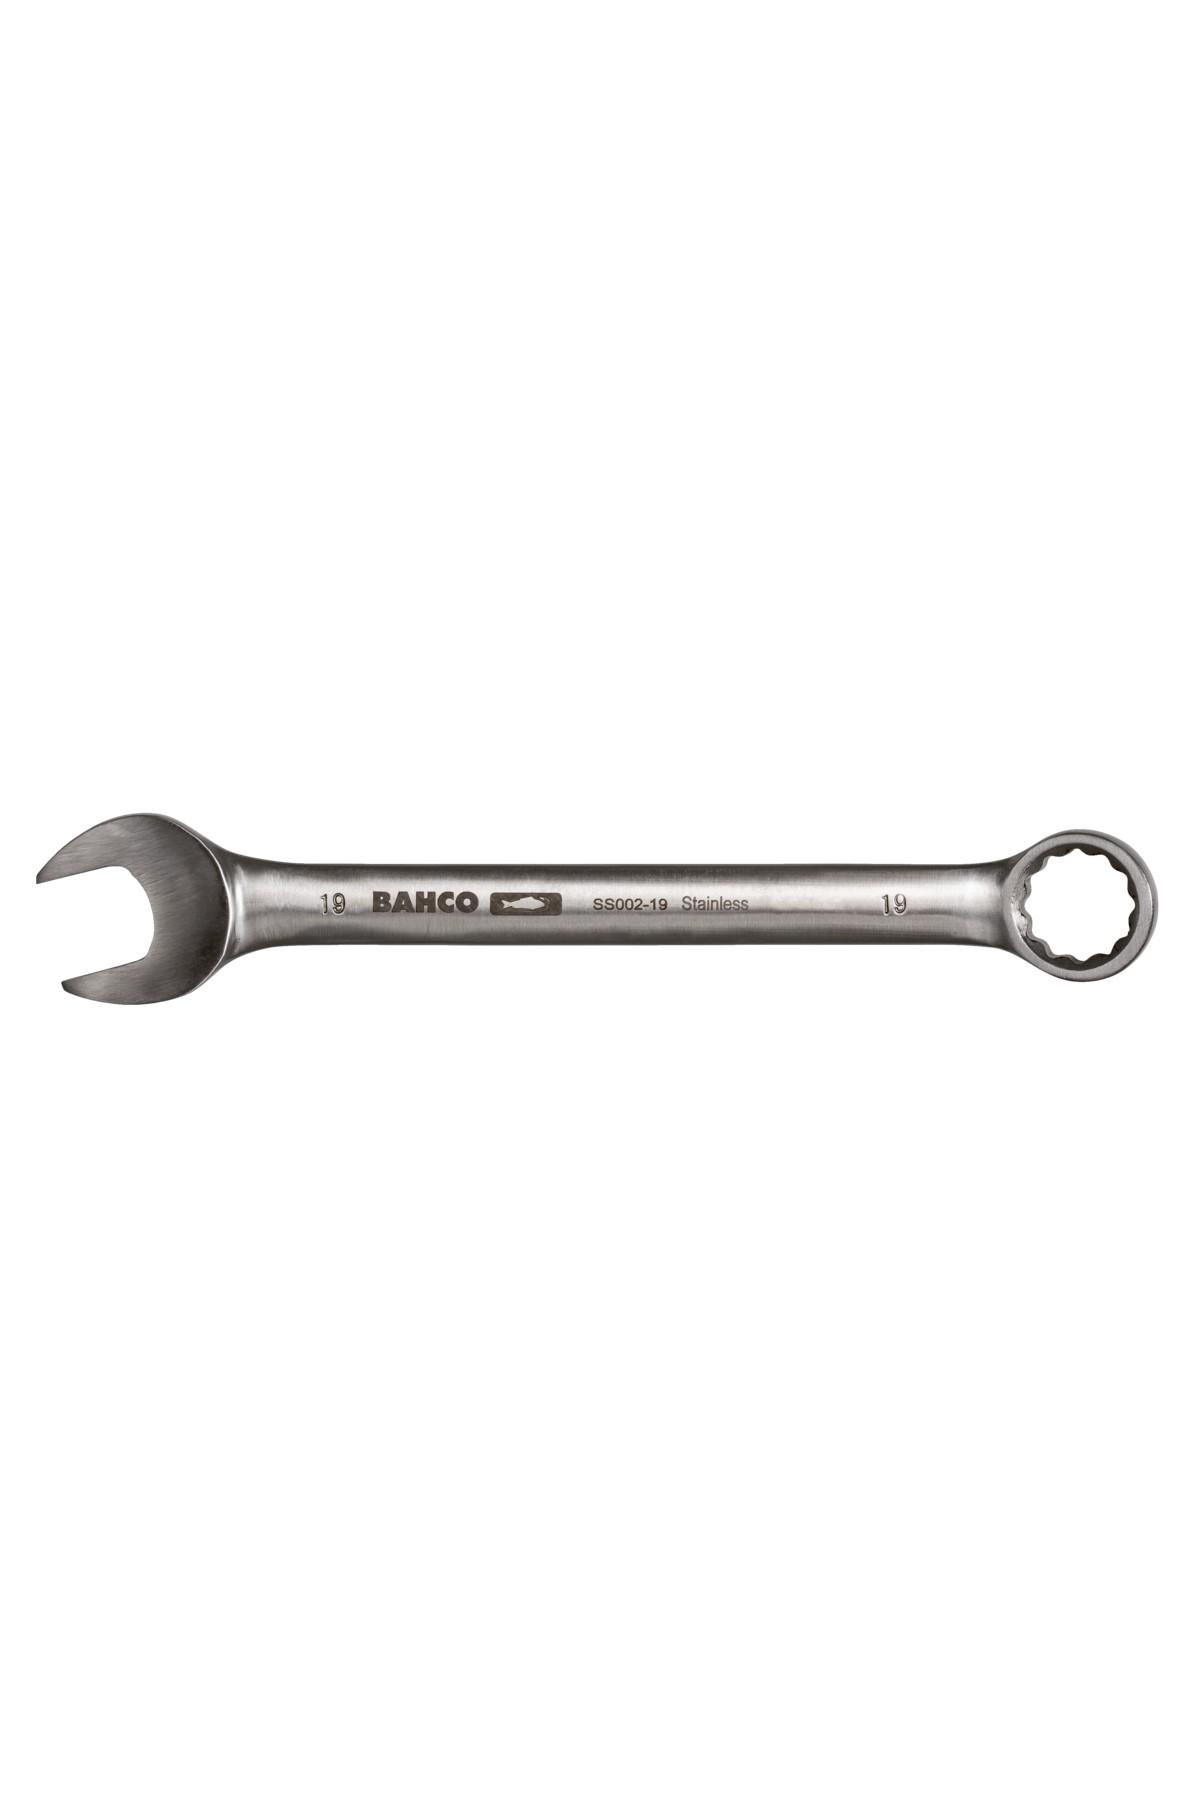 Ring spanner stainless steel 27mm